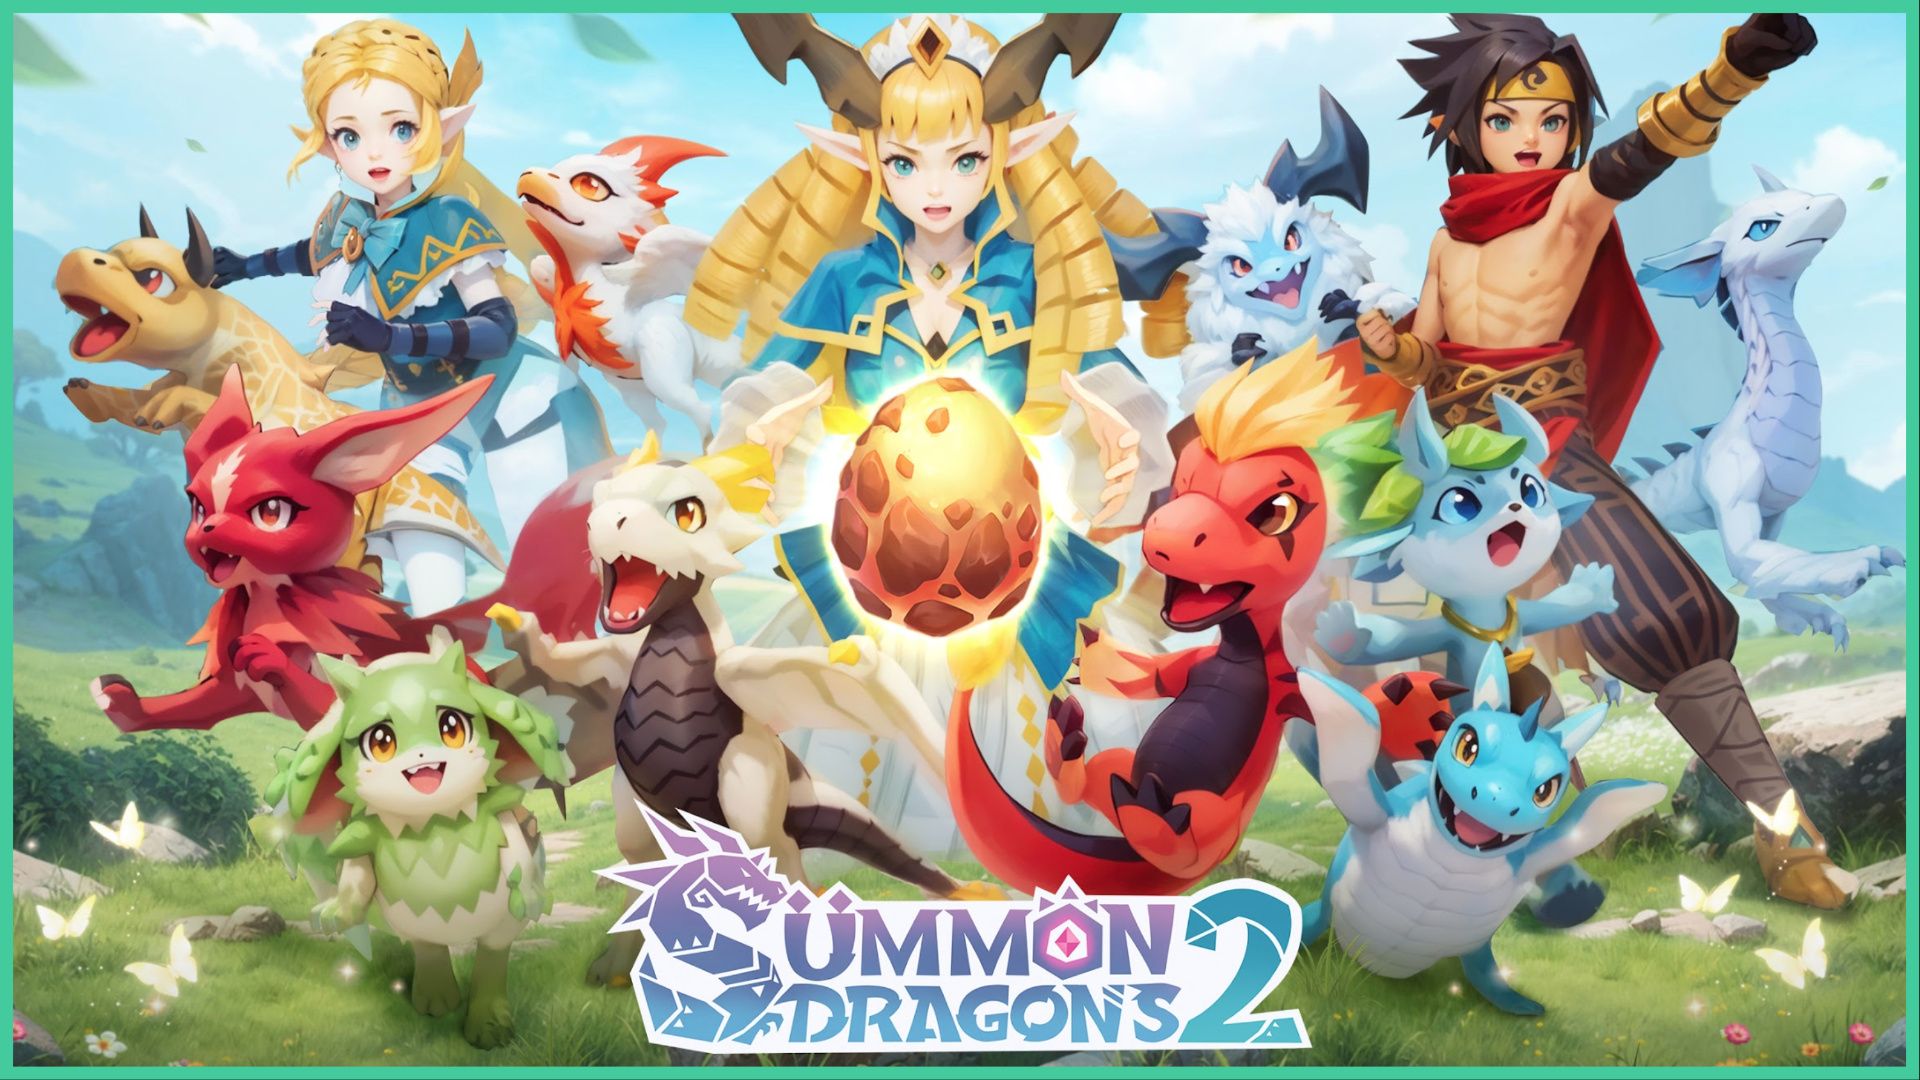 Summon Dragons 2 Tier List – All Dragons Ranked